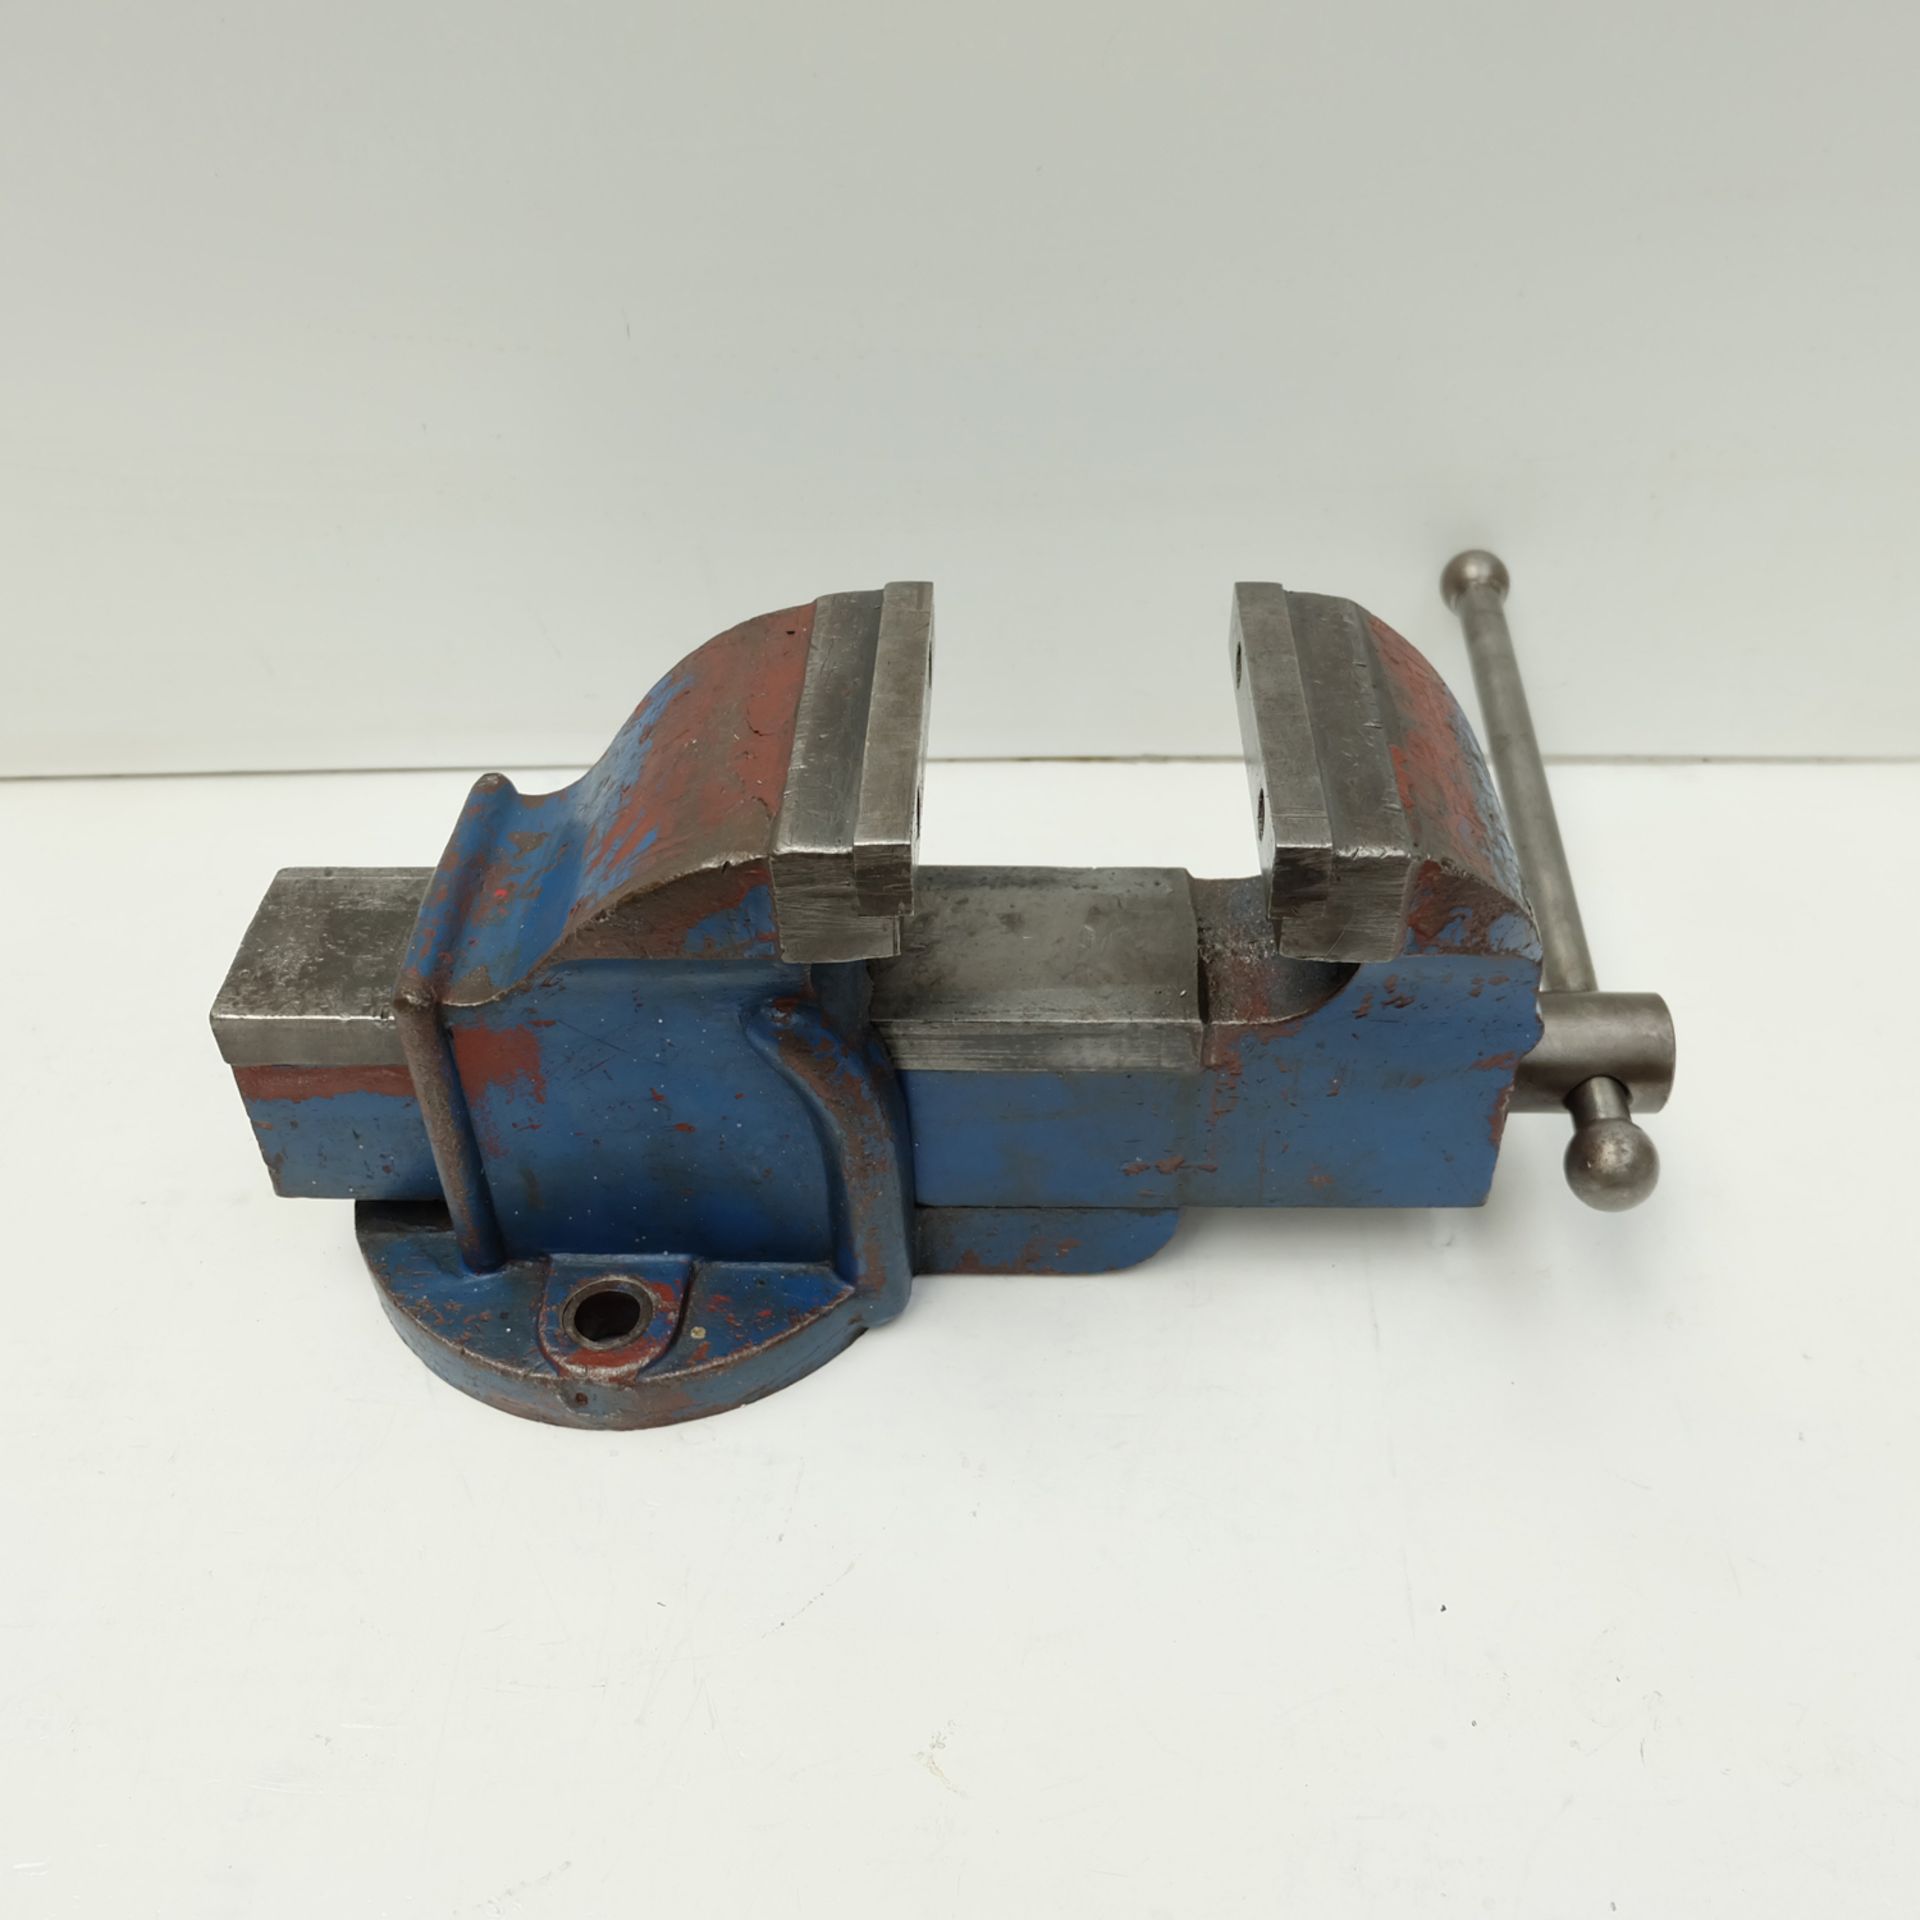 5" Bench Vice. Jaw Size 5". Max Opening 6 1/2". Jaw Height 3 1/4" Approx.